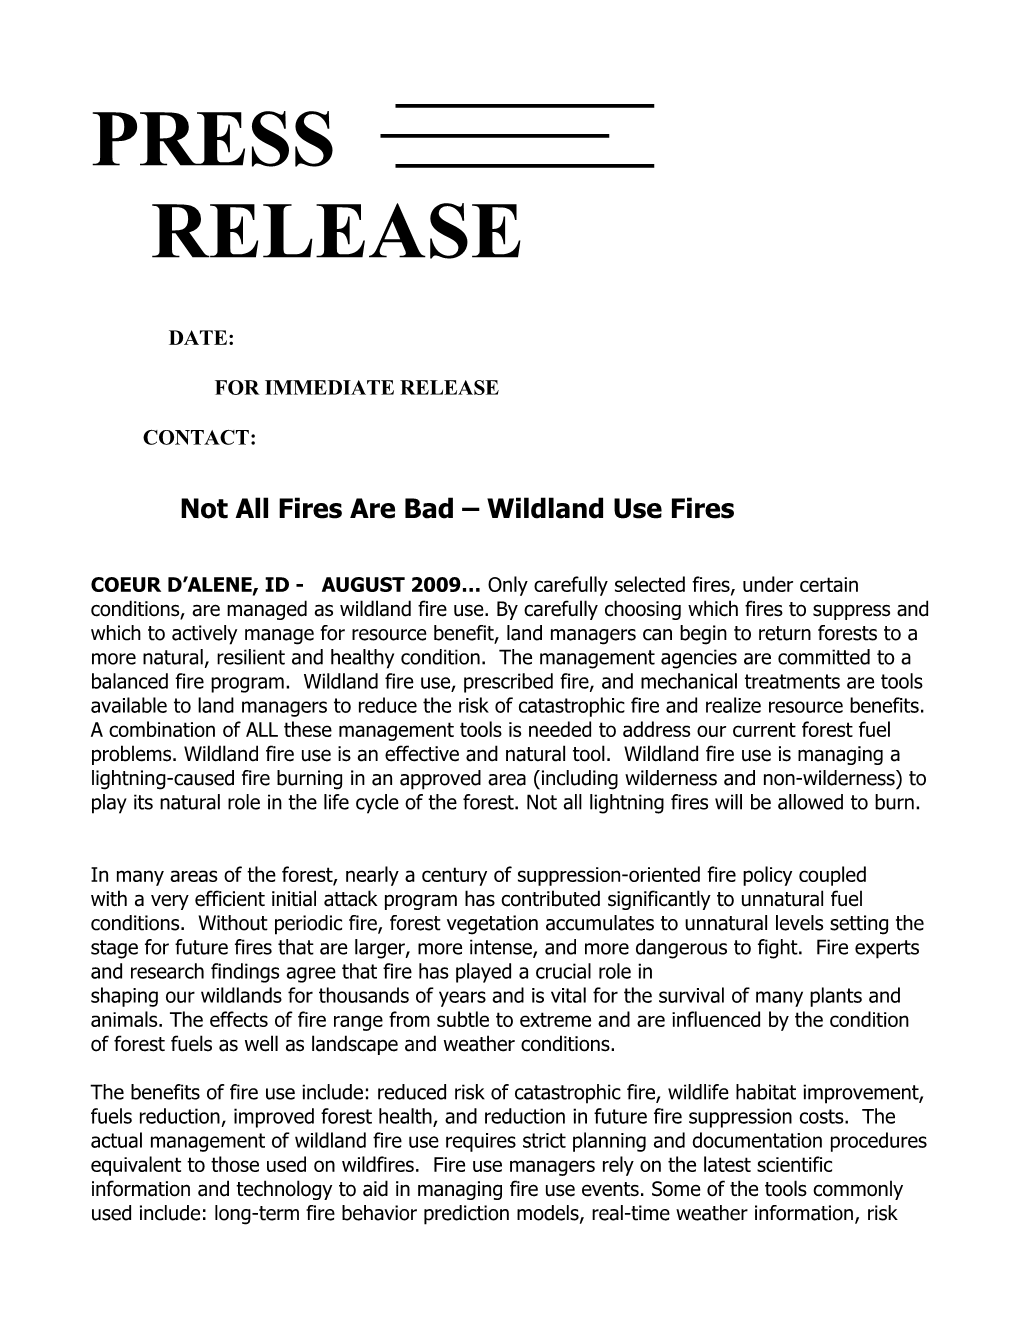 Not All Fires Are Bad Wildland Use Fires